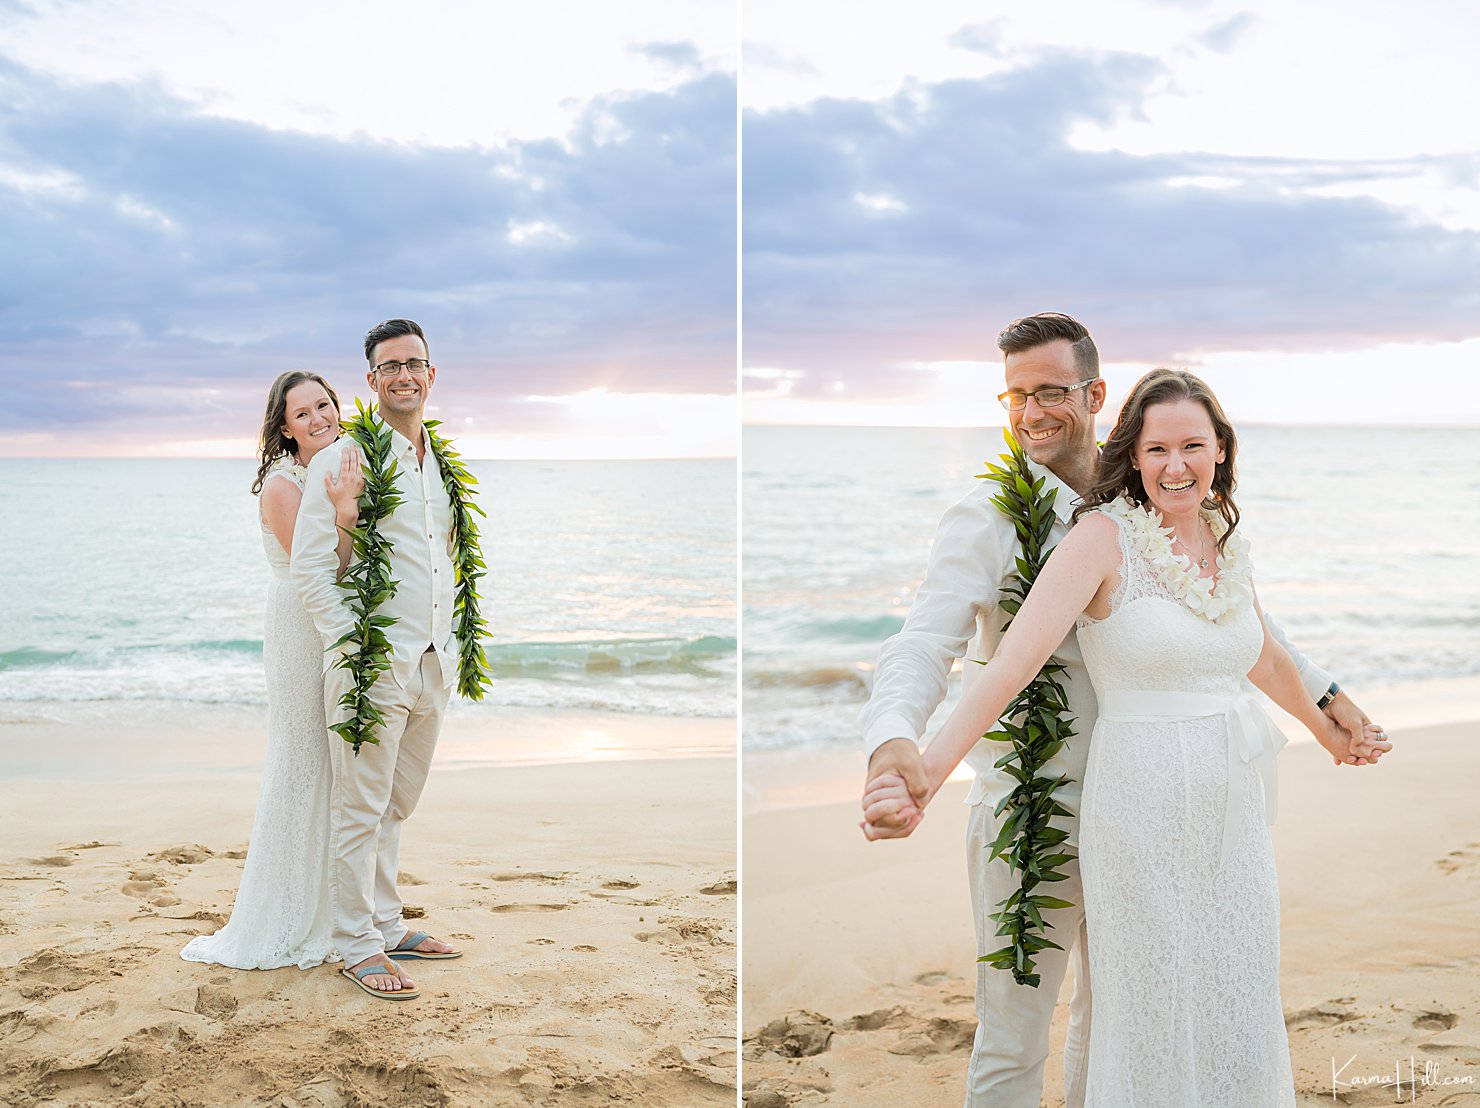 Cute Vow Renewal Photography